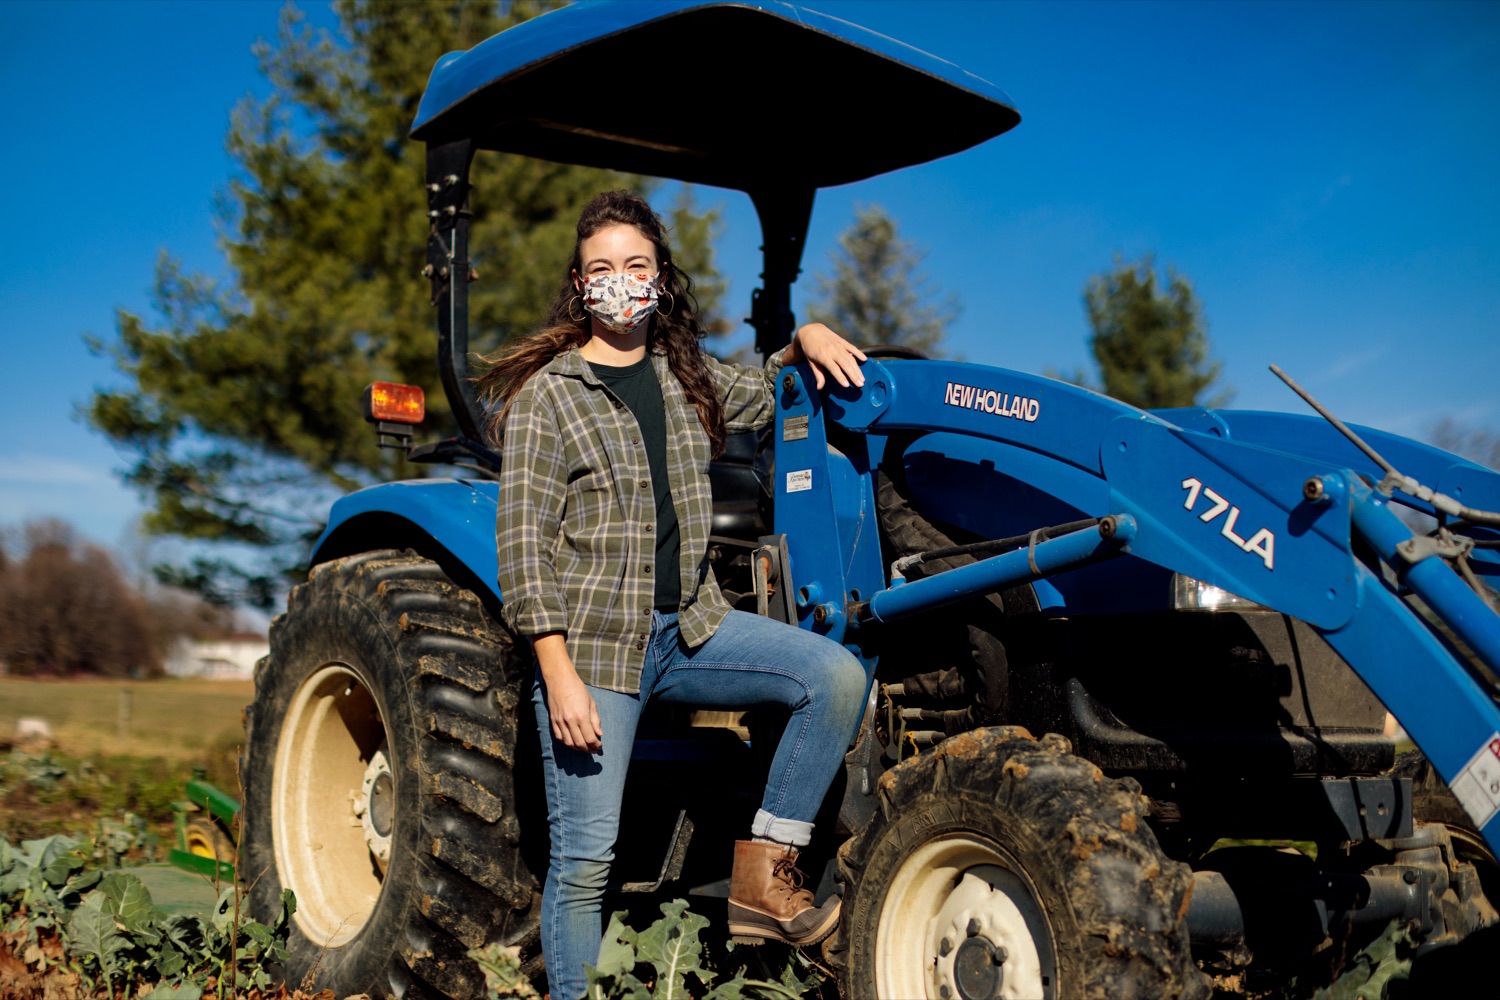 Jessi Lee Ross, 30, farm hand with Crooked Row Farm, poses for a photograph on the farm in Orefield on Friday, November 20, 2020.<br><a href="https://filesource.amperwave.net/commonwealthofpa/photo/18325_AGRIC_Farm_Show_NK_009.jpg" target="_blank">⇣ Download Photo</a>